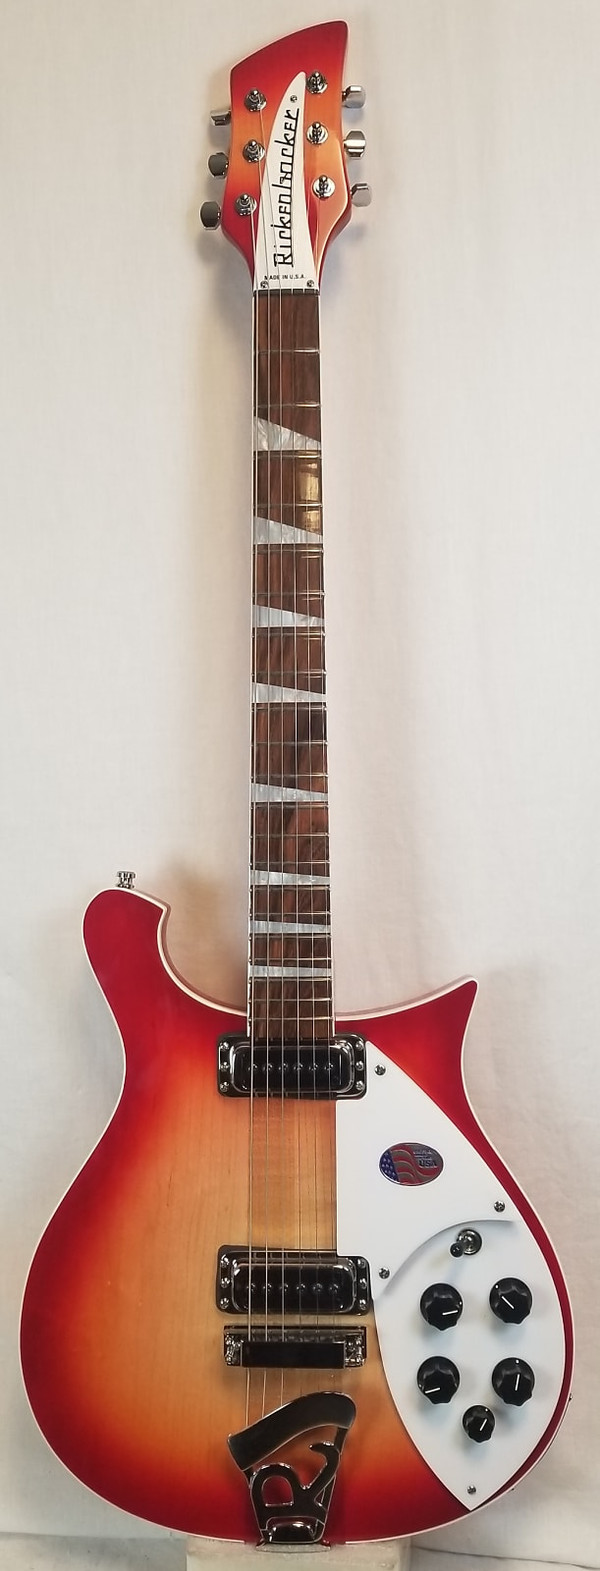 Rickenbacker 620 Fire Glo Deluxe Bound Body & Neck, Inlays, 21 Fret, 2 Pickups, Wired For Stereo